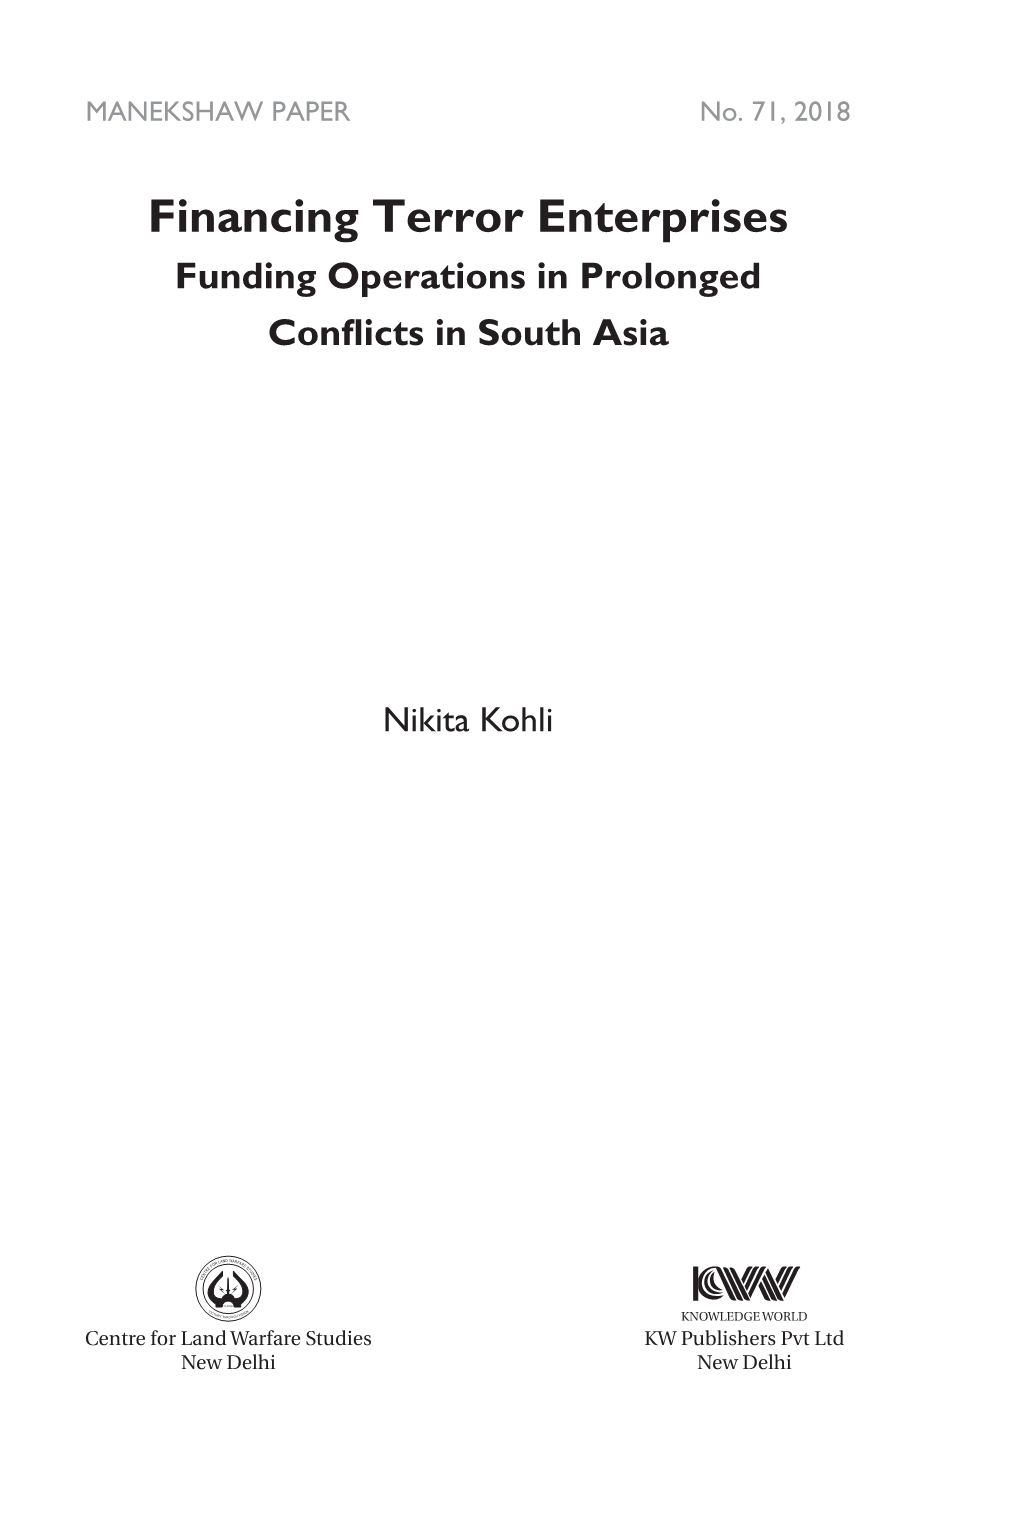 Financing Terror Enterprises Funding Operations in Prolonged Conflicts in South Asia